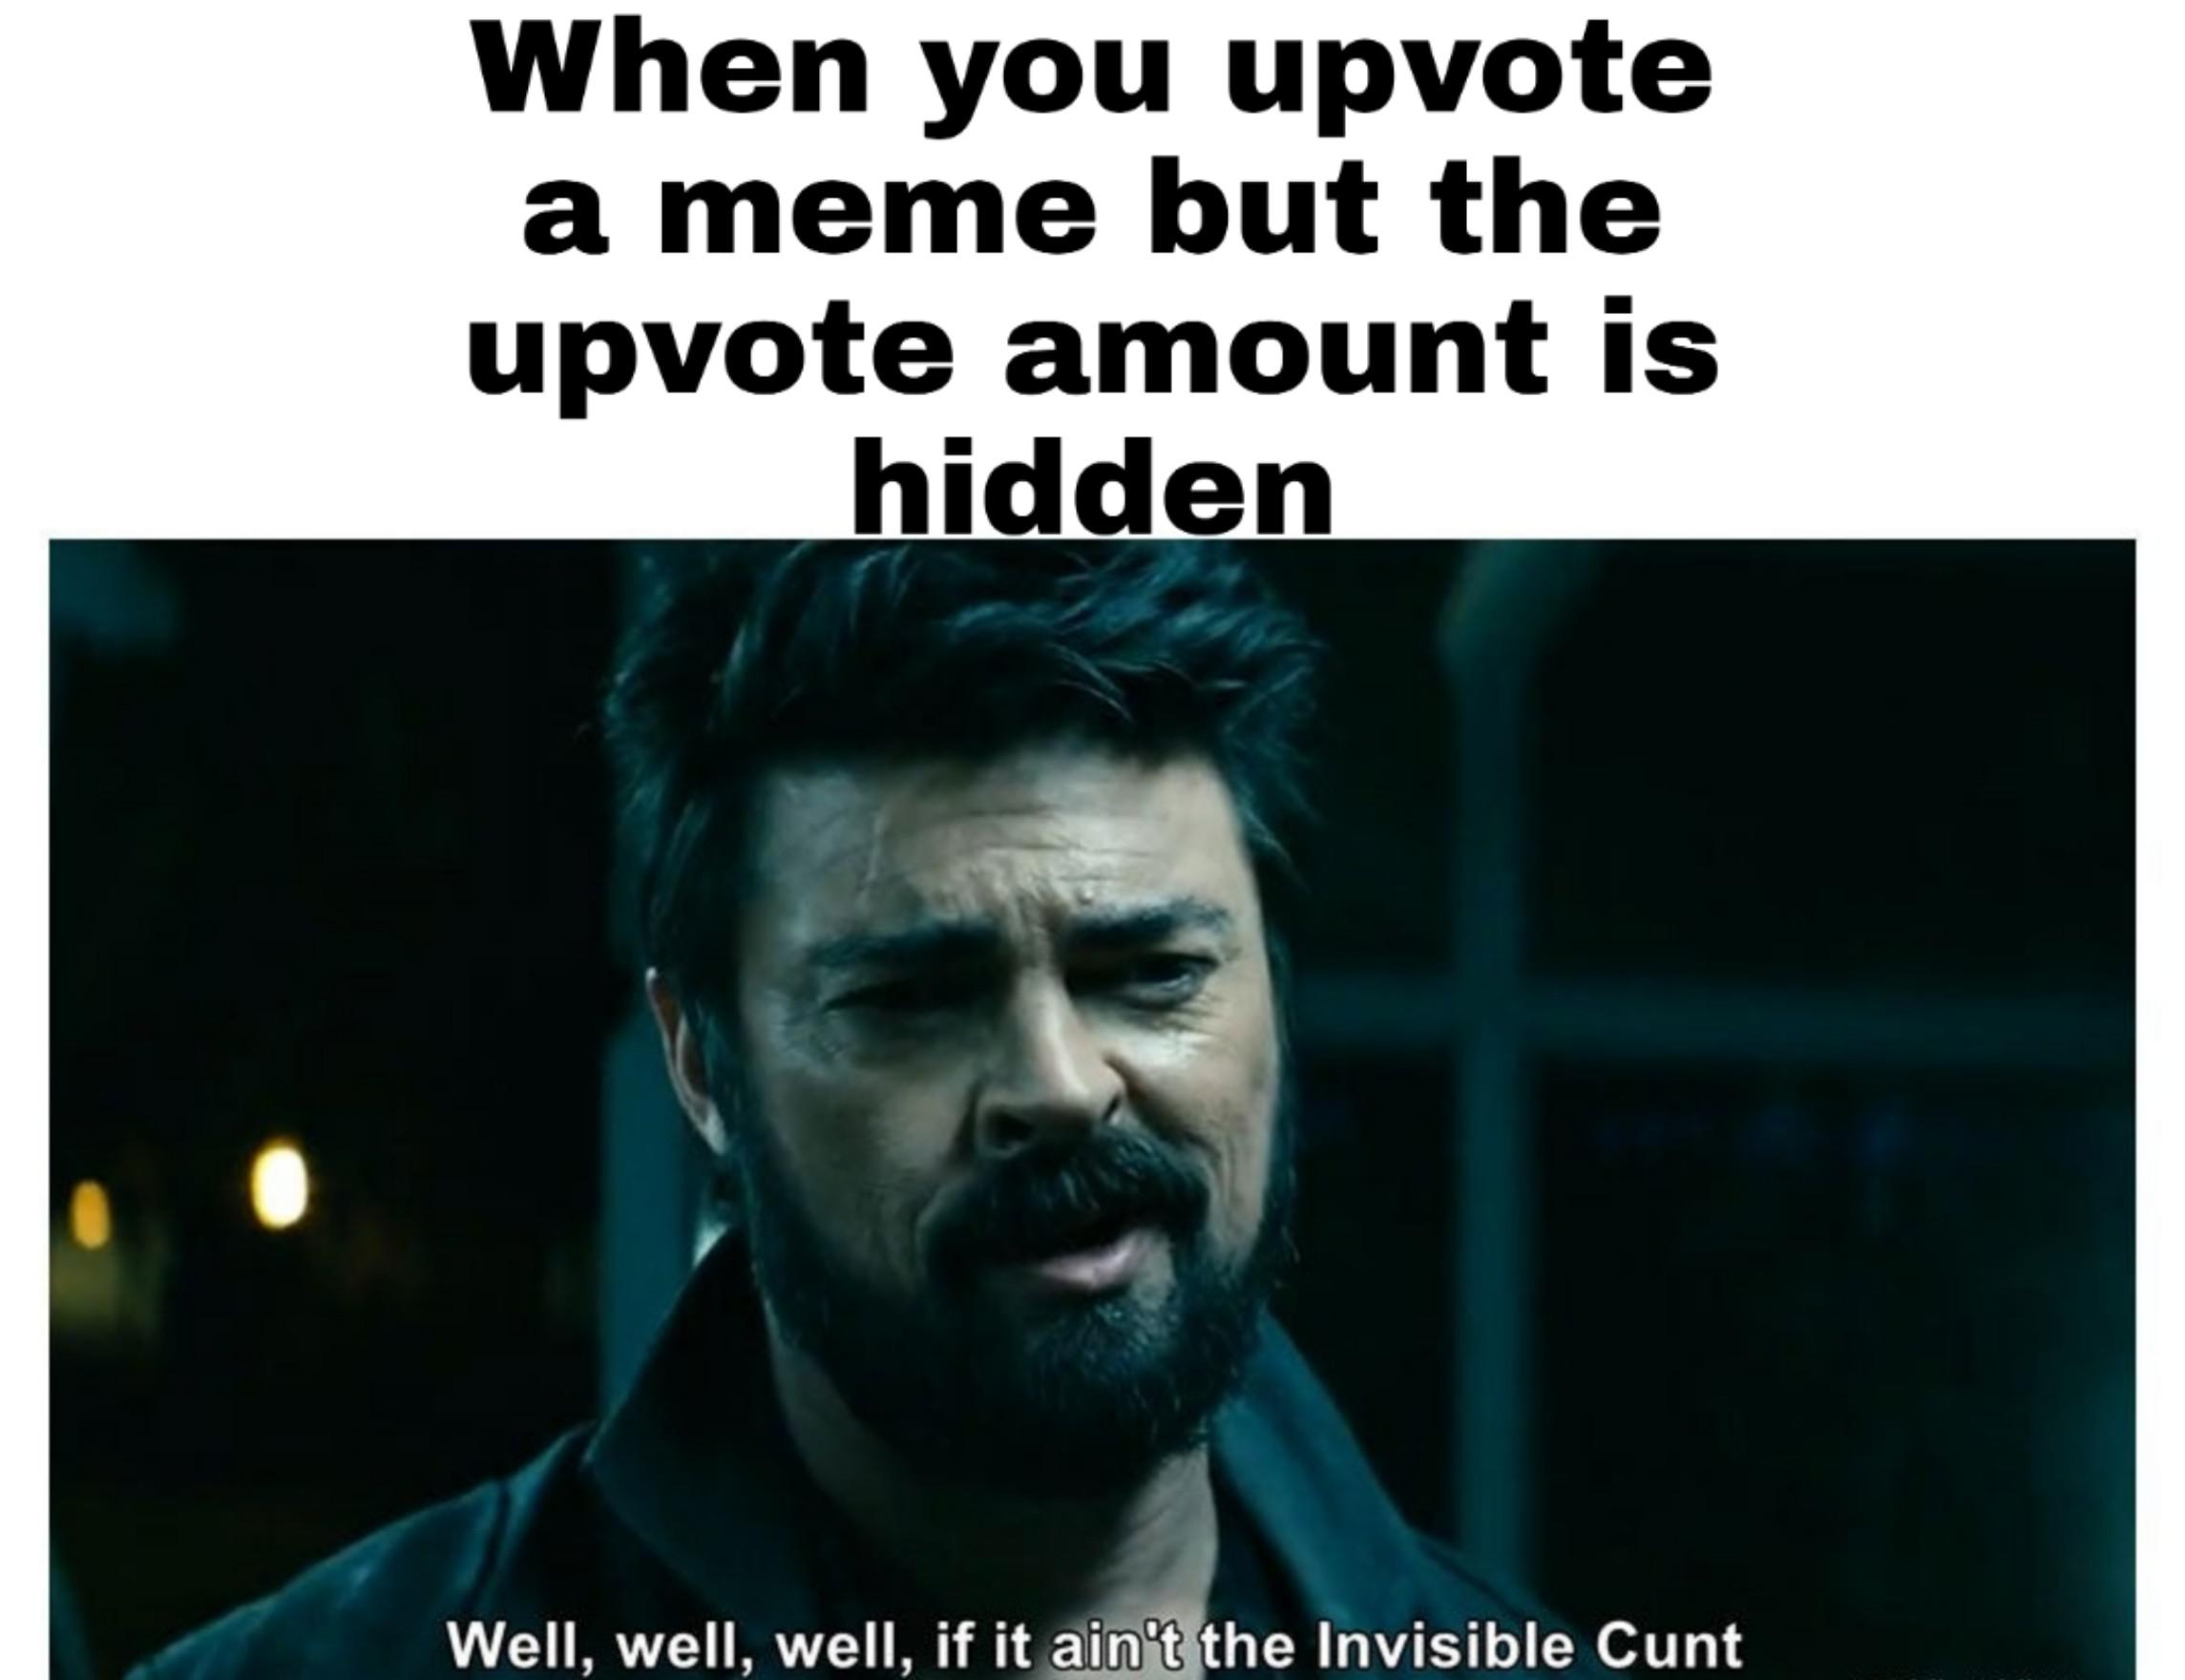 dank other-memes dank text: When you upvote a meme but the upvote amount is hidden Well, well, well, if it ain't the Invisible Cunt 